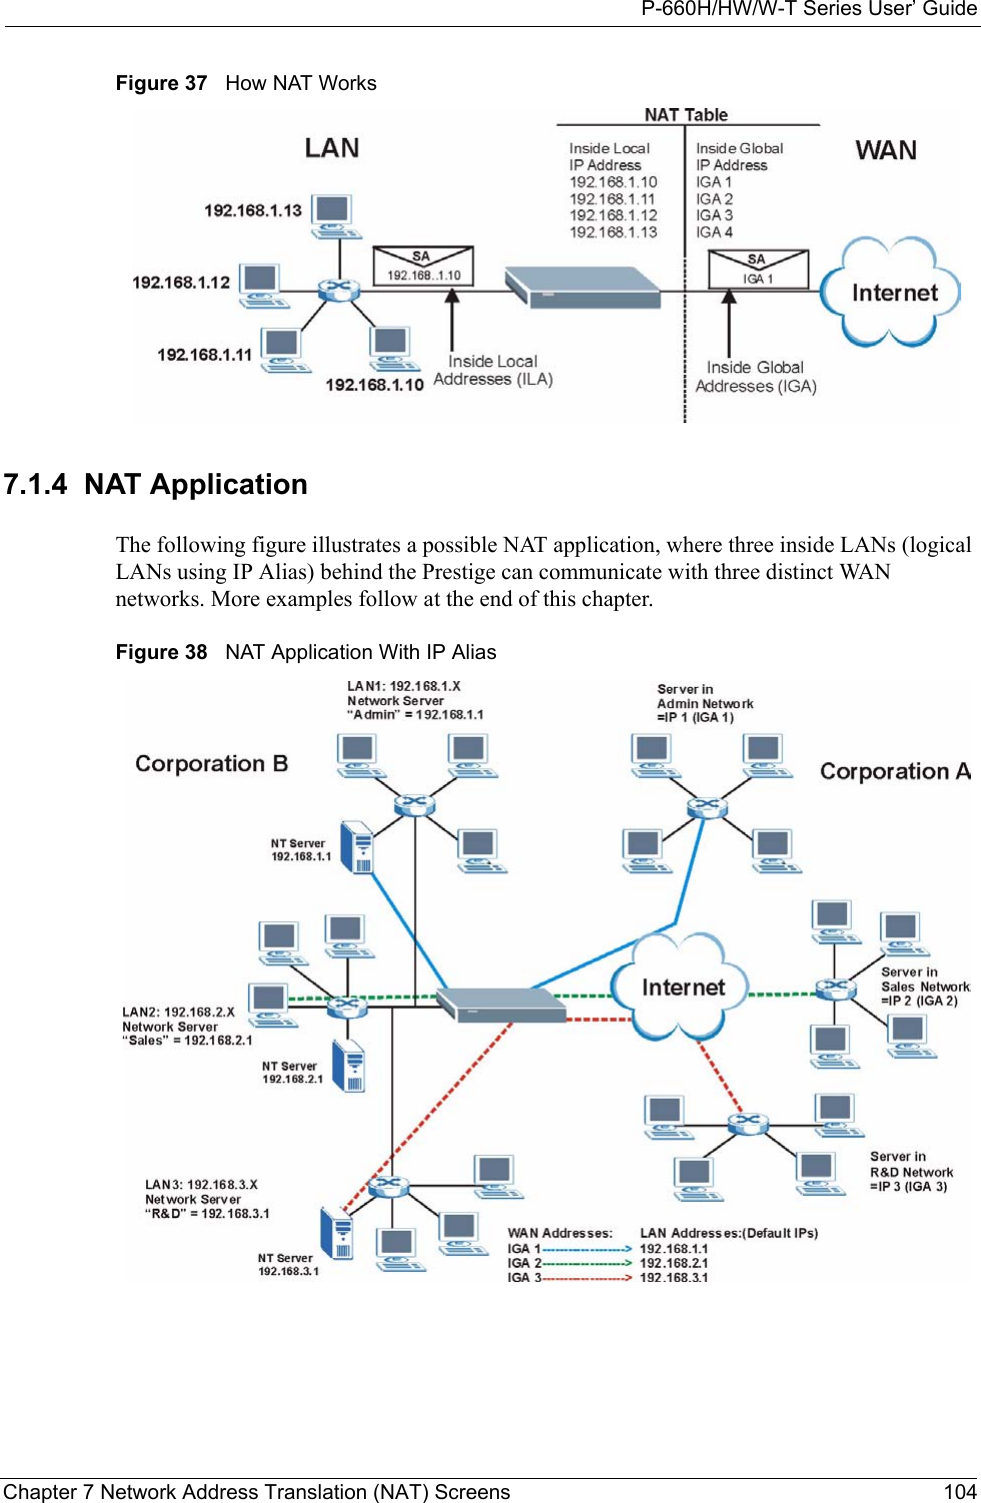 P-660H/HW/W-T Series User’ GuideChapter 7 Network Address Translation (NAT) Screens 104Figure 37   How NAT Works7.1.4  NAT ApplicationThe following figure illustrates a possible NAT application, where three inside LANs (logical LANs using IP Alias) behind the Prestige can communicate with three distinct WAN networks. More examples follow at the end of this chapter.Figure 38   NAT Application With IP Alias